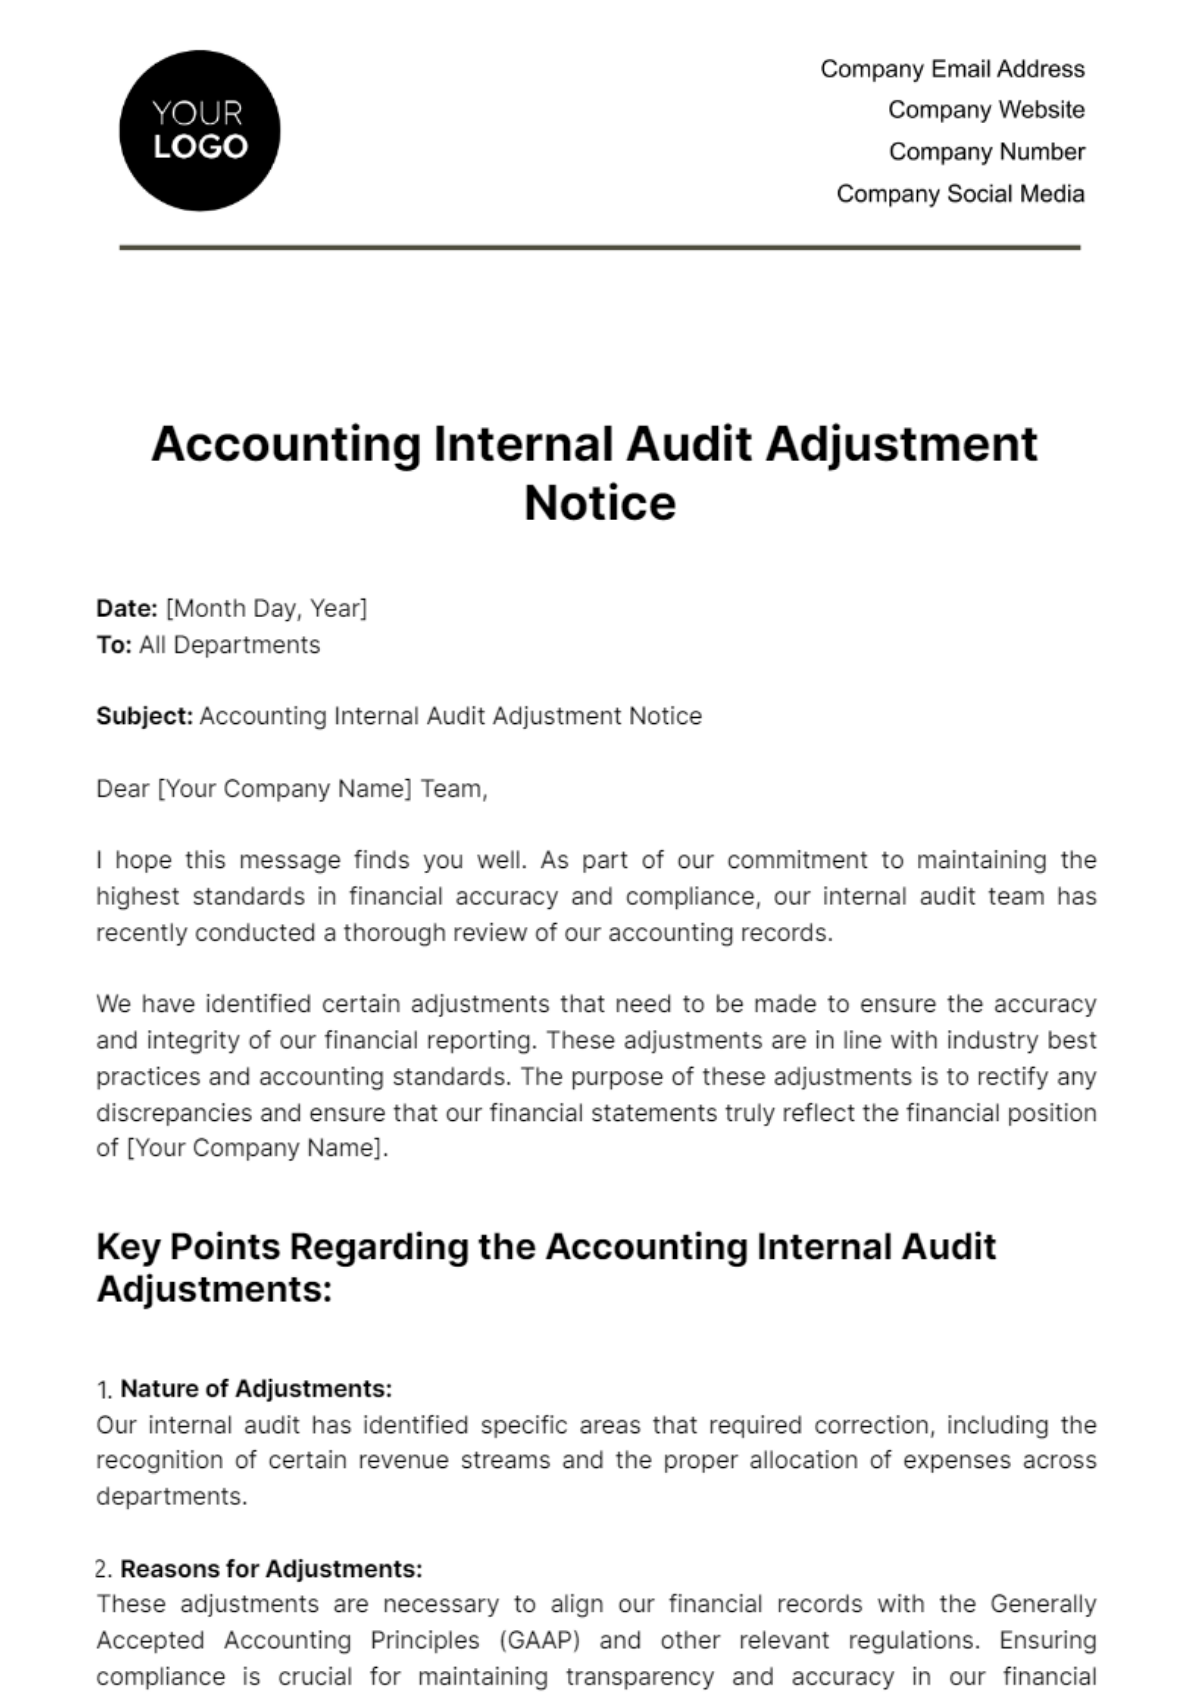 Free Accounting Internal Audit Adjustment Notice Template